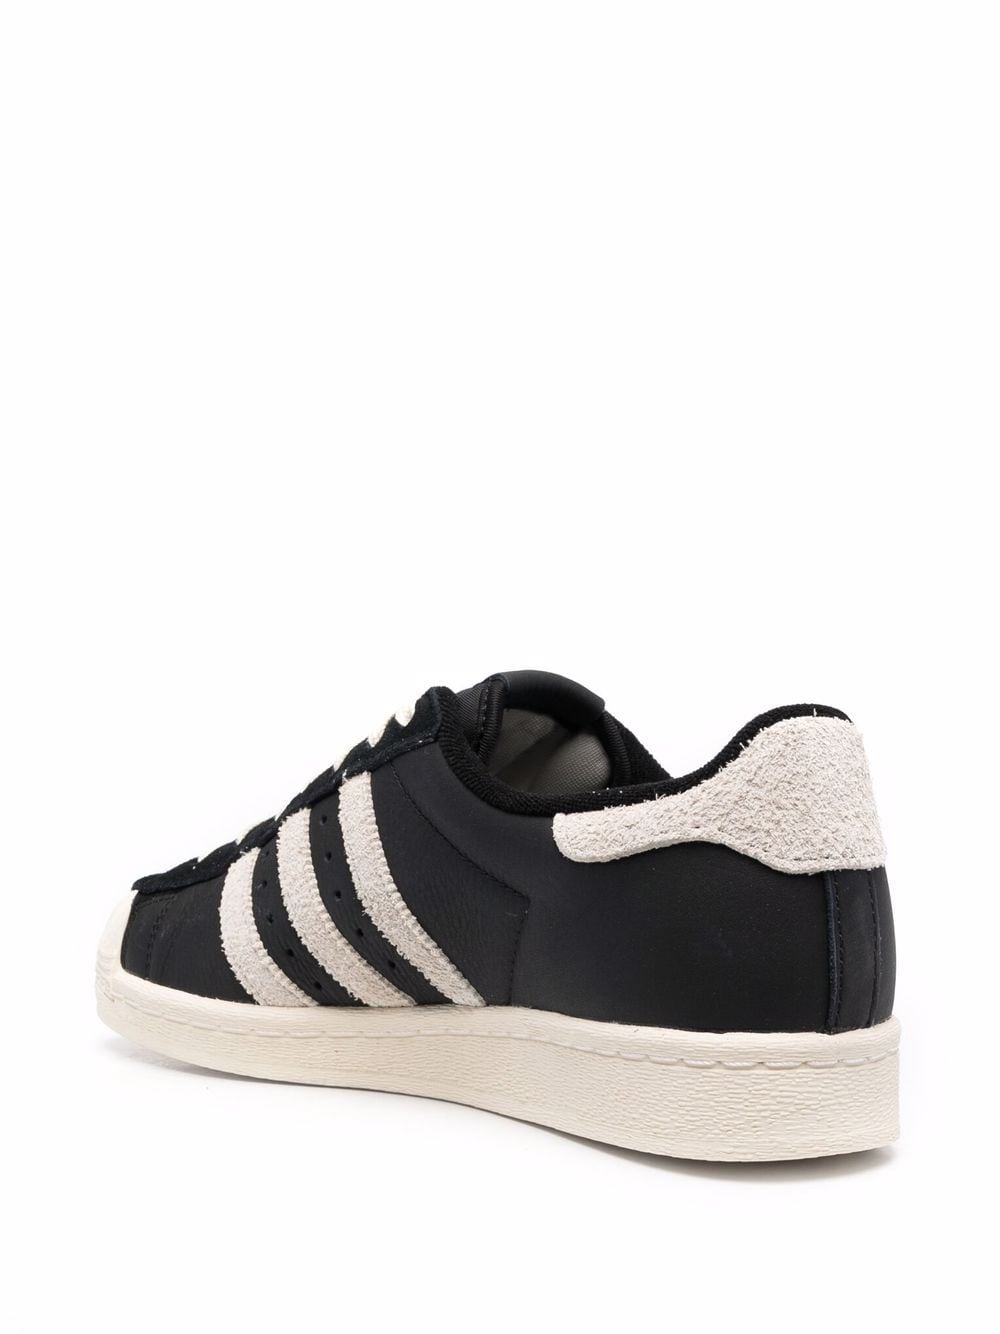 Adidas Superstar 82 Leather Sneakers - Farfetch